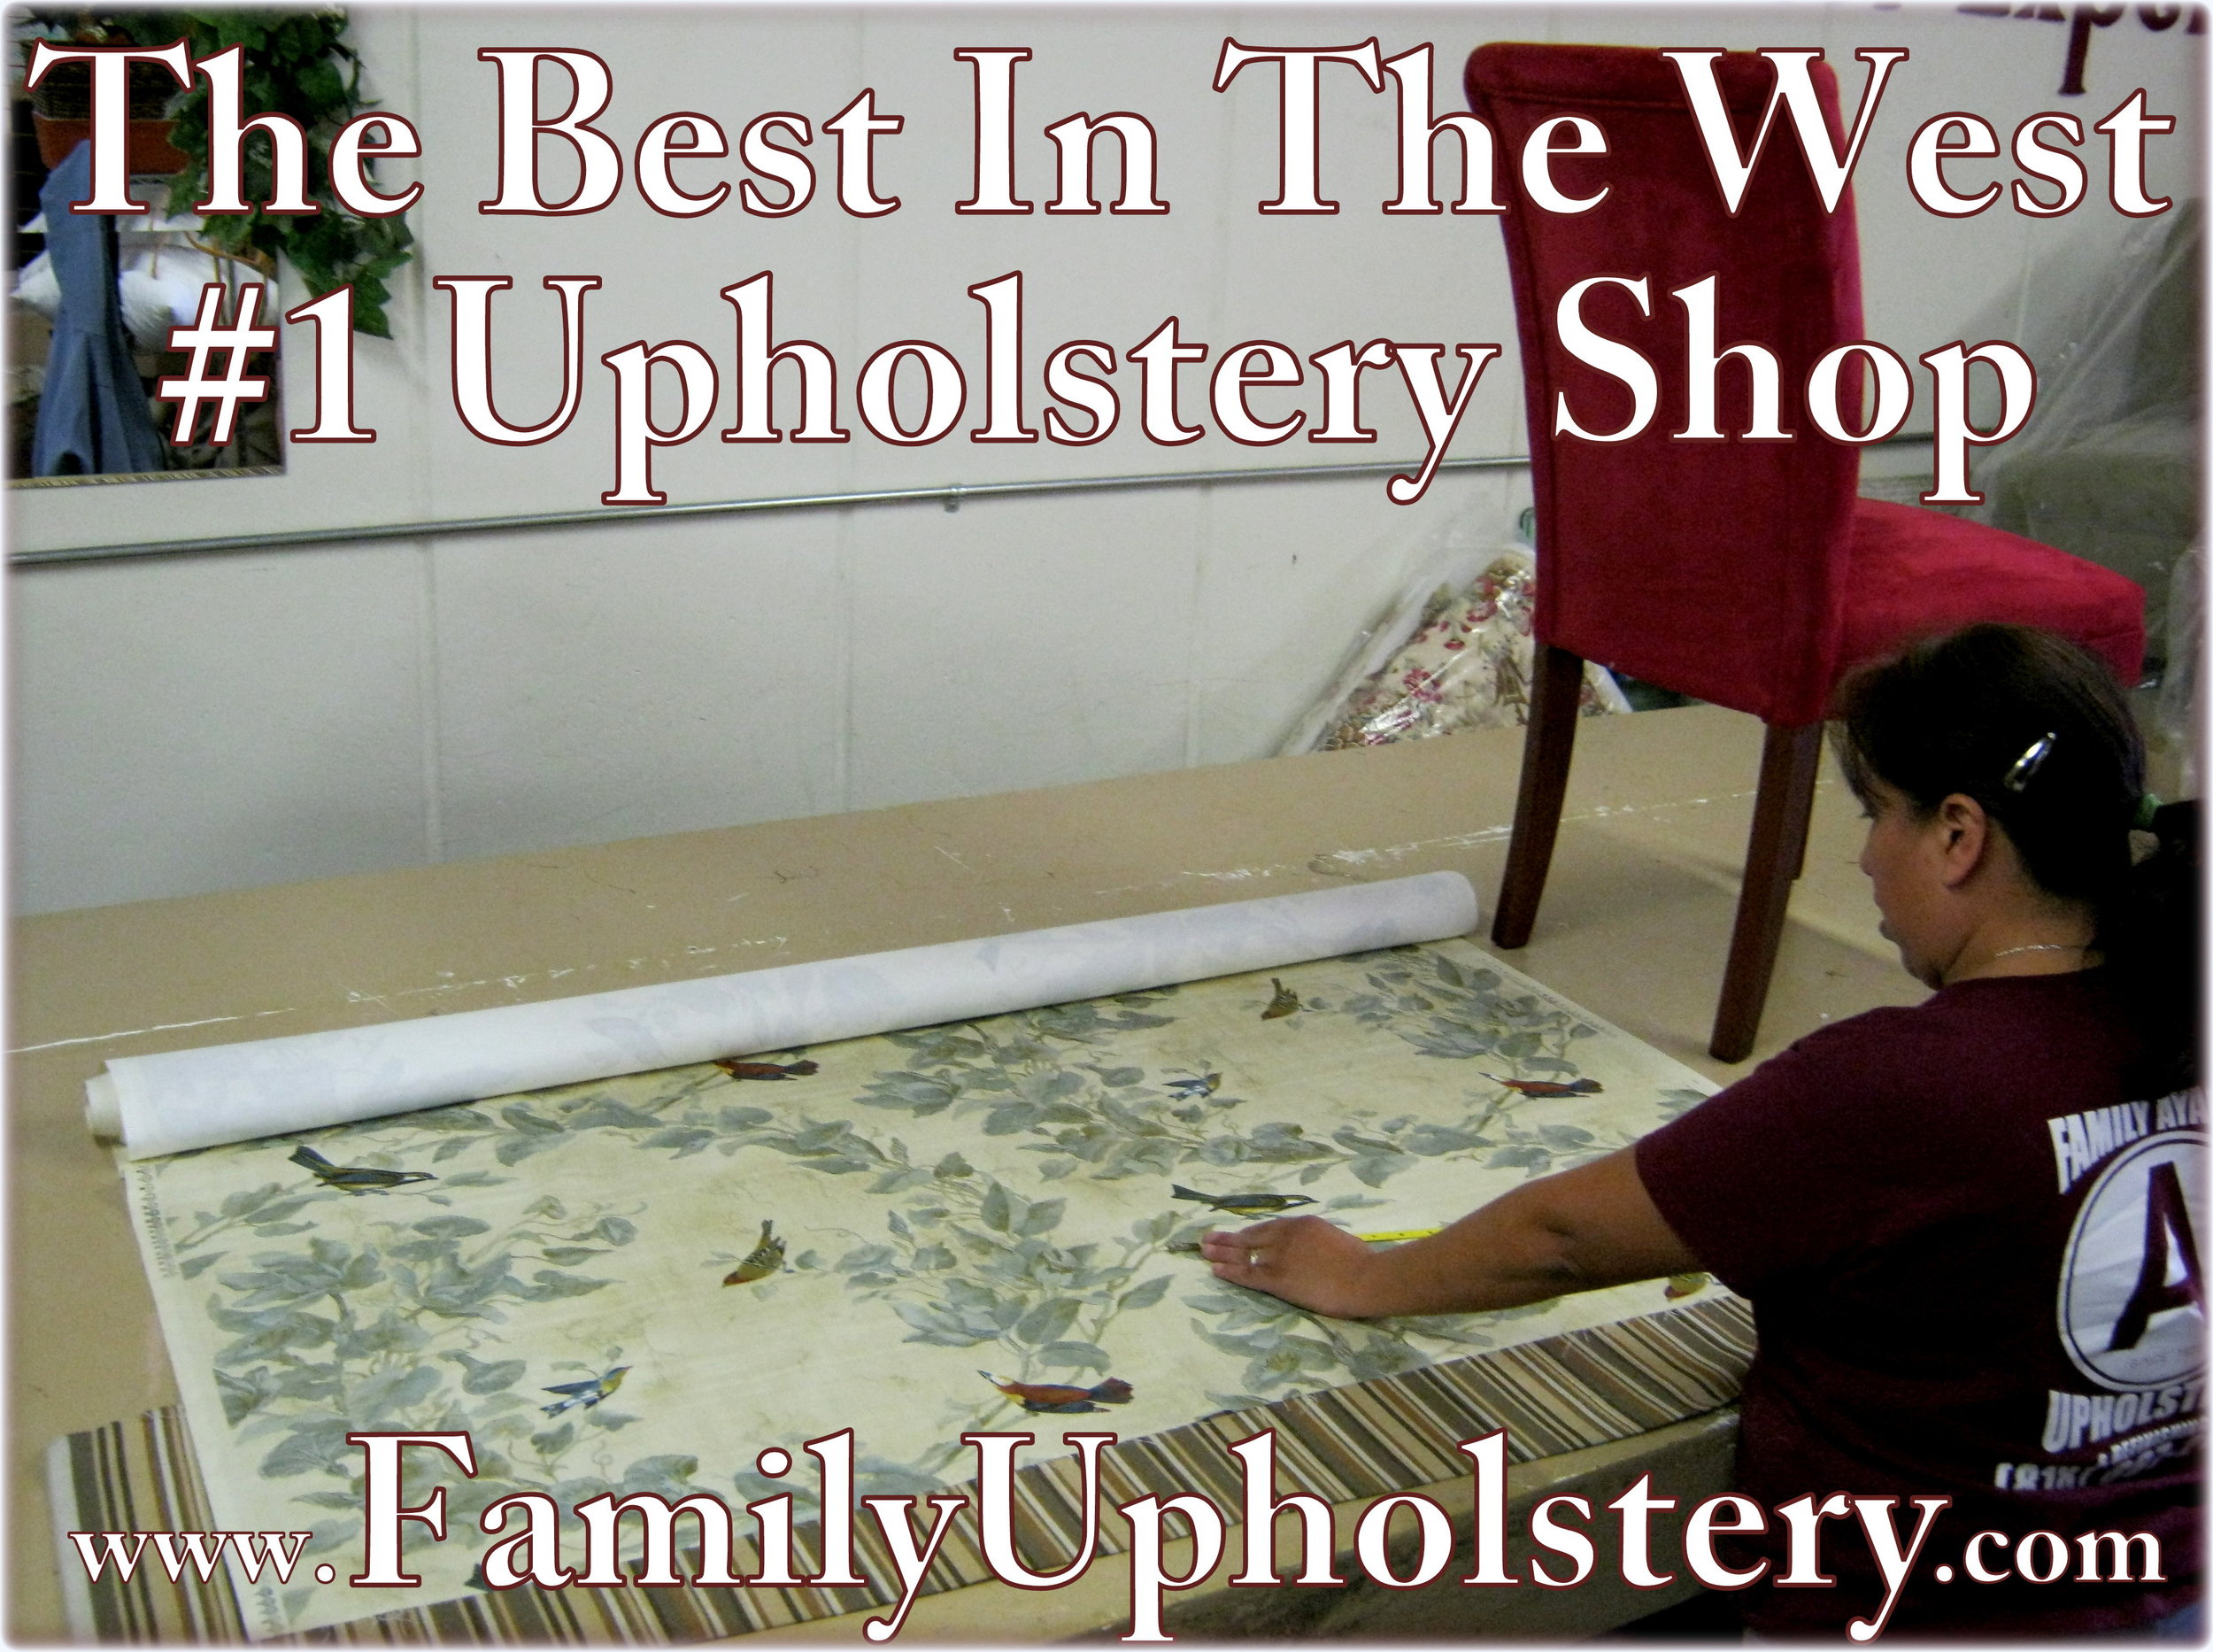 Family Upholstery shop of leathers in CA.jpg